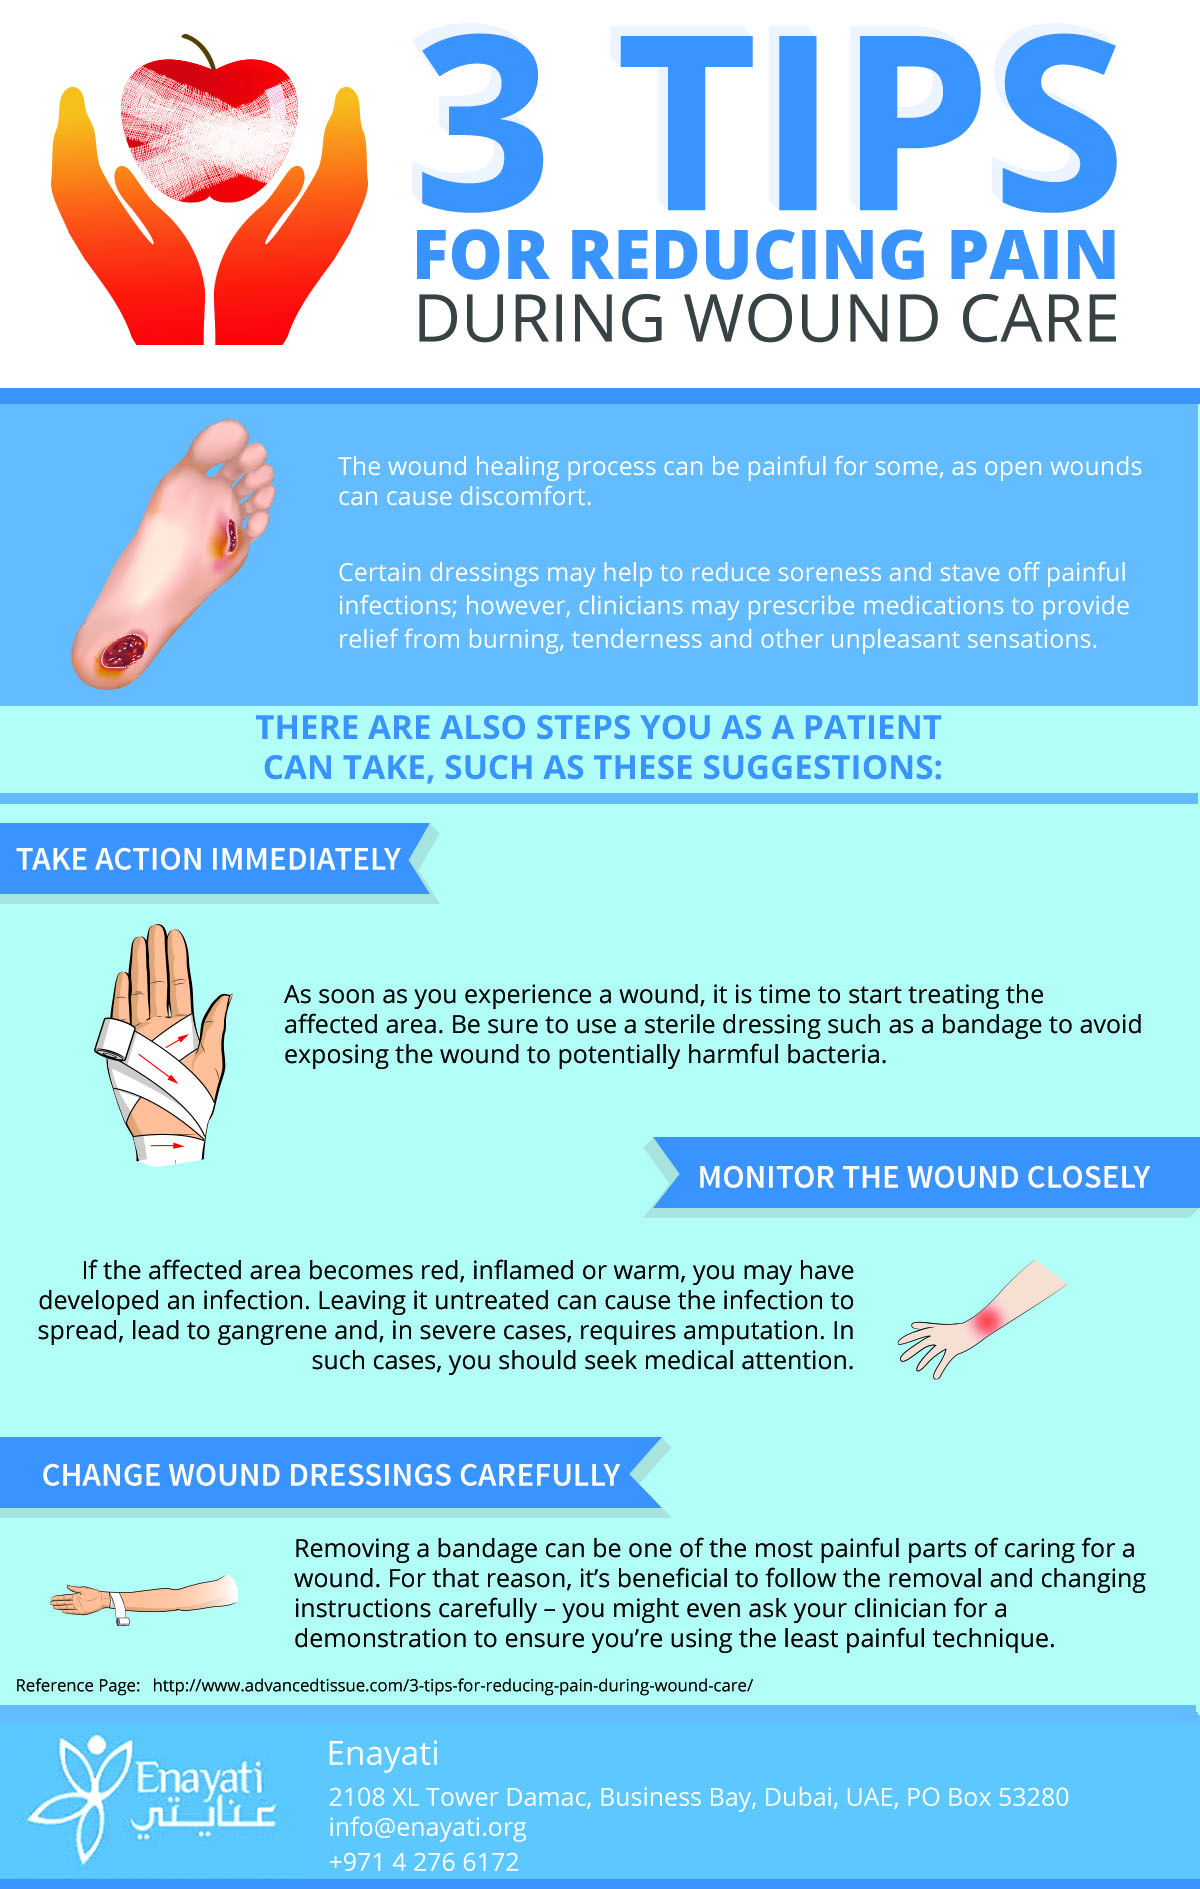 3 Tips for Reducing Pain during Wound Care | Visual.ly